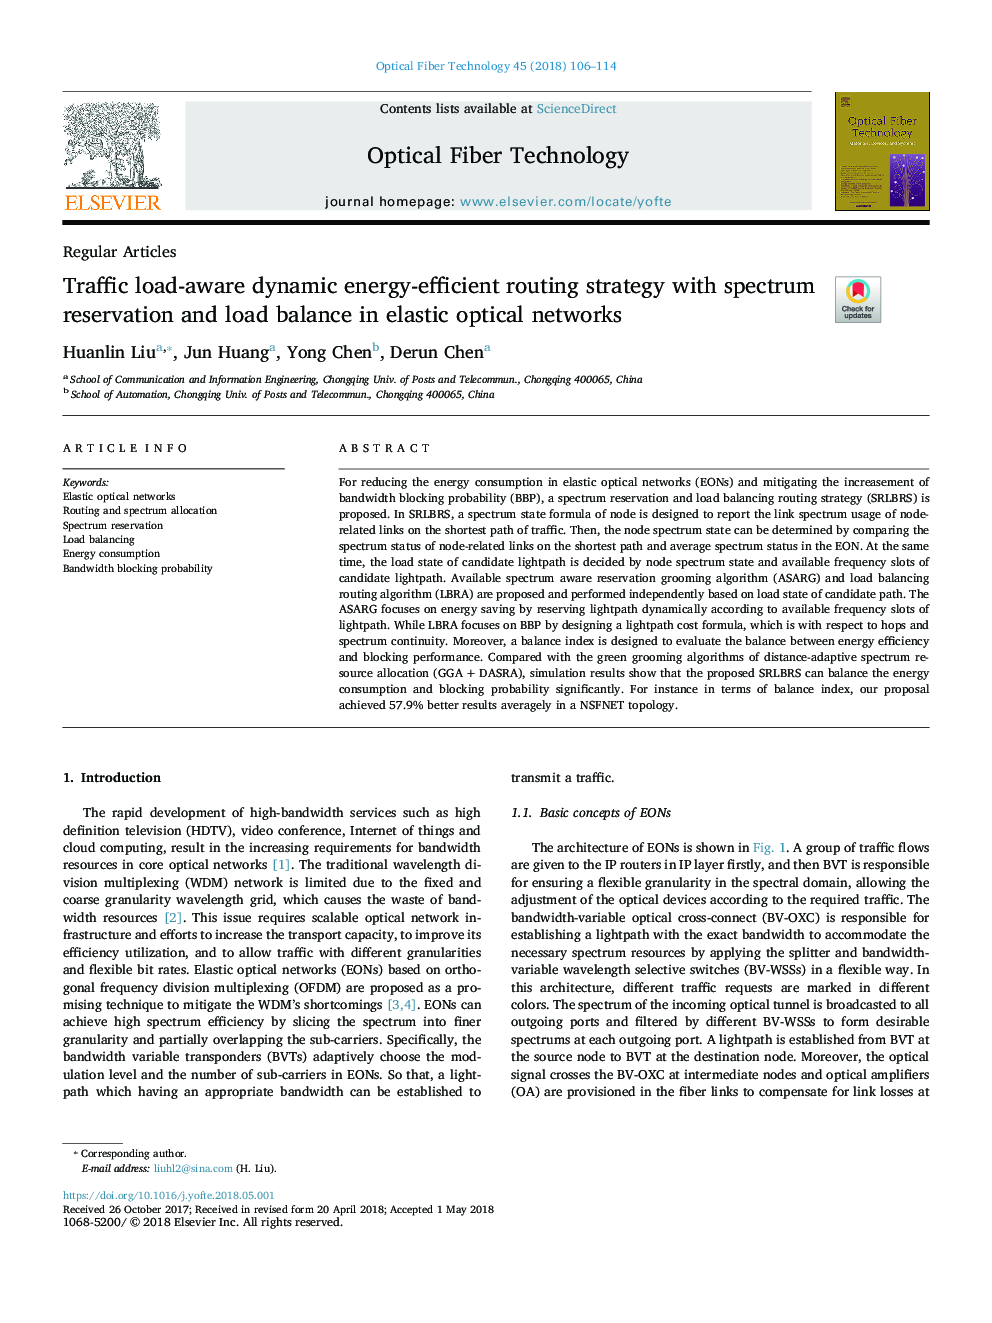 Traffic load-aware dynamic energy-efficient routing strategy with spectrum reservation and load balance in elastic optical networks